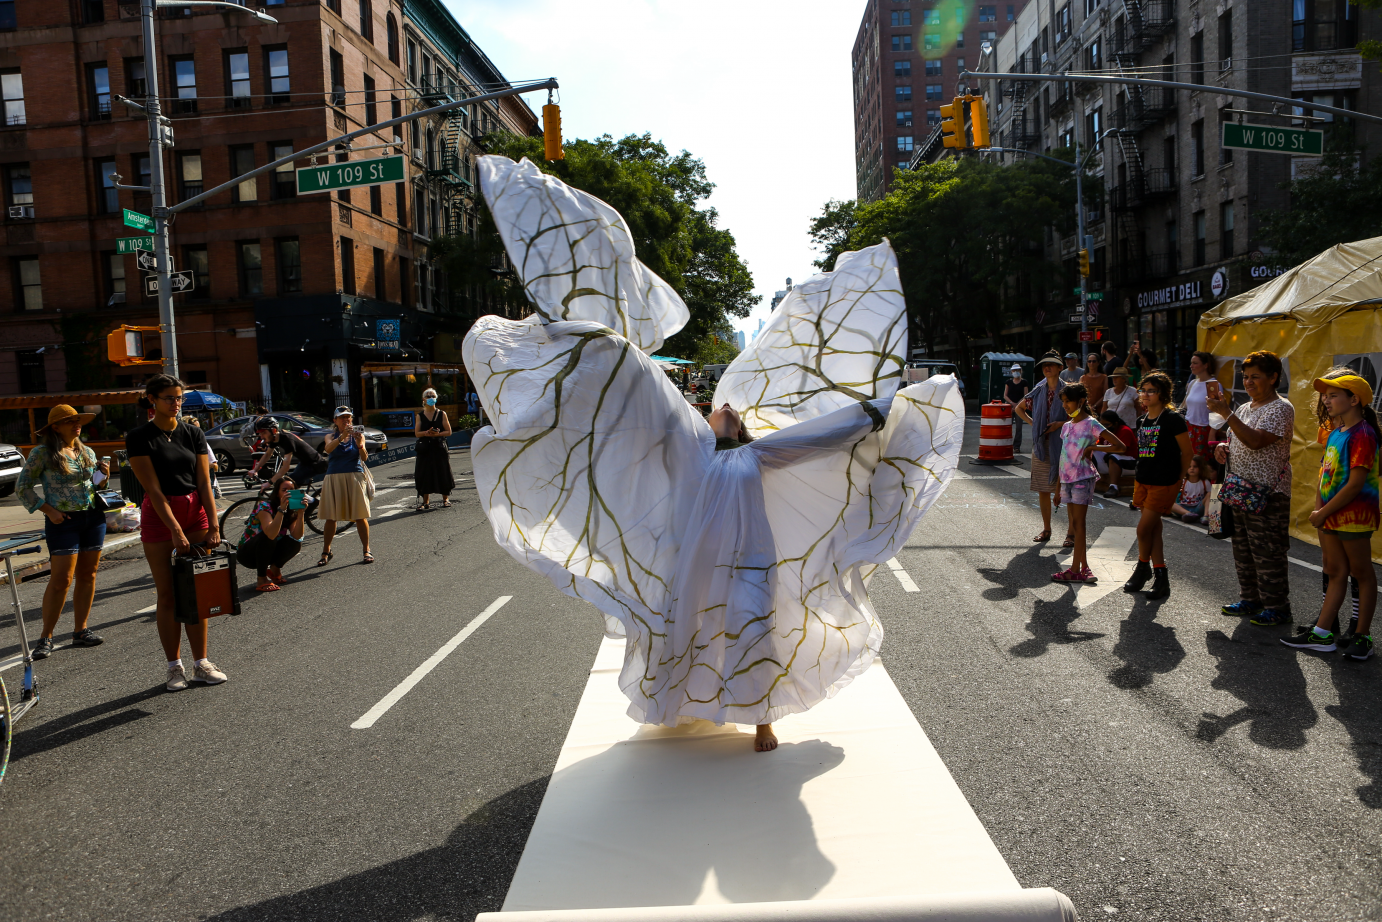 On a New York street, Jody Sperling wears a long white dress decorated with gold swirls. She lifts her arms in the air, head thrown back, as the fabric moves with her.